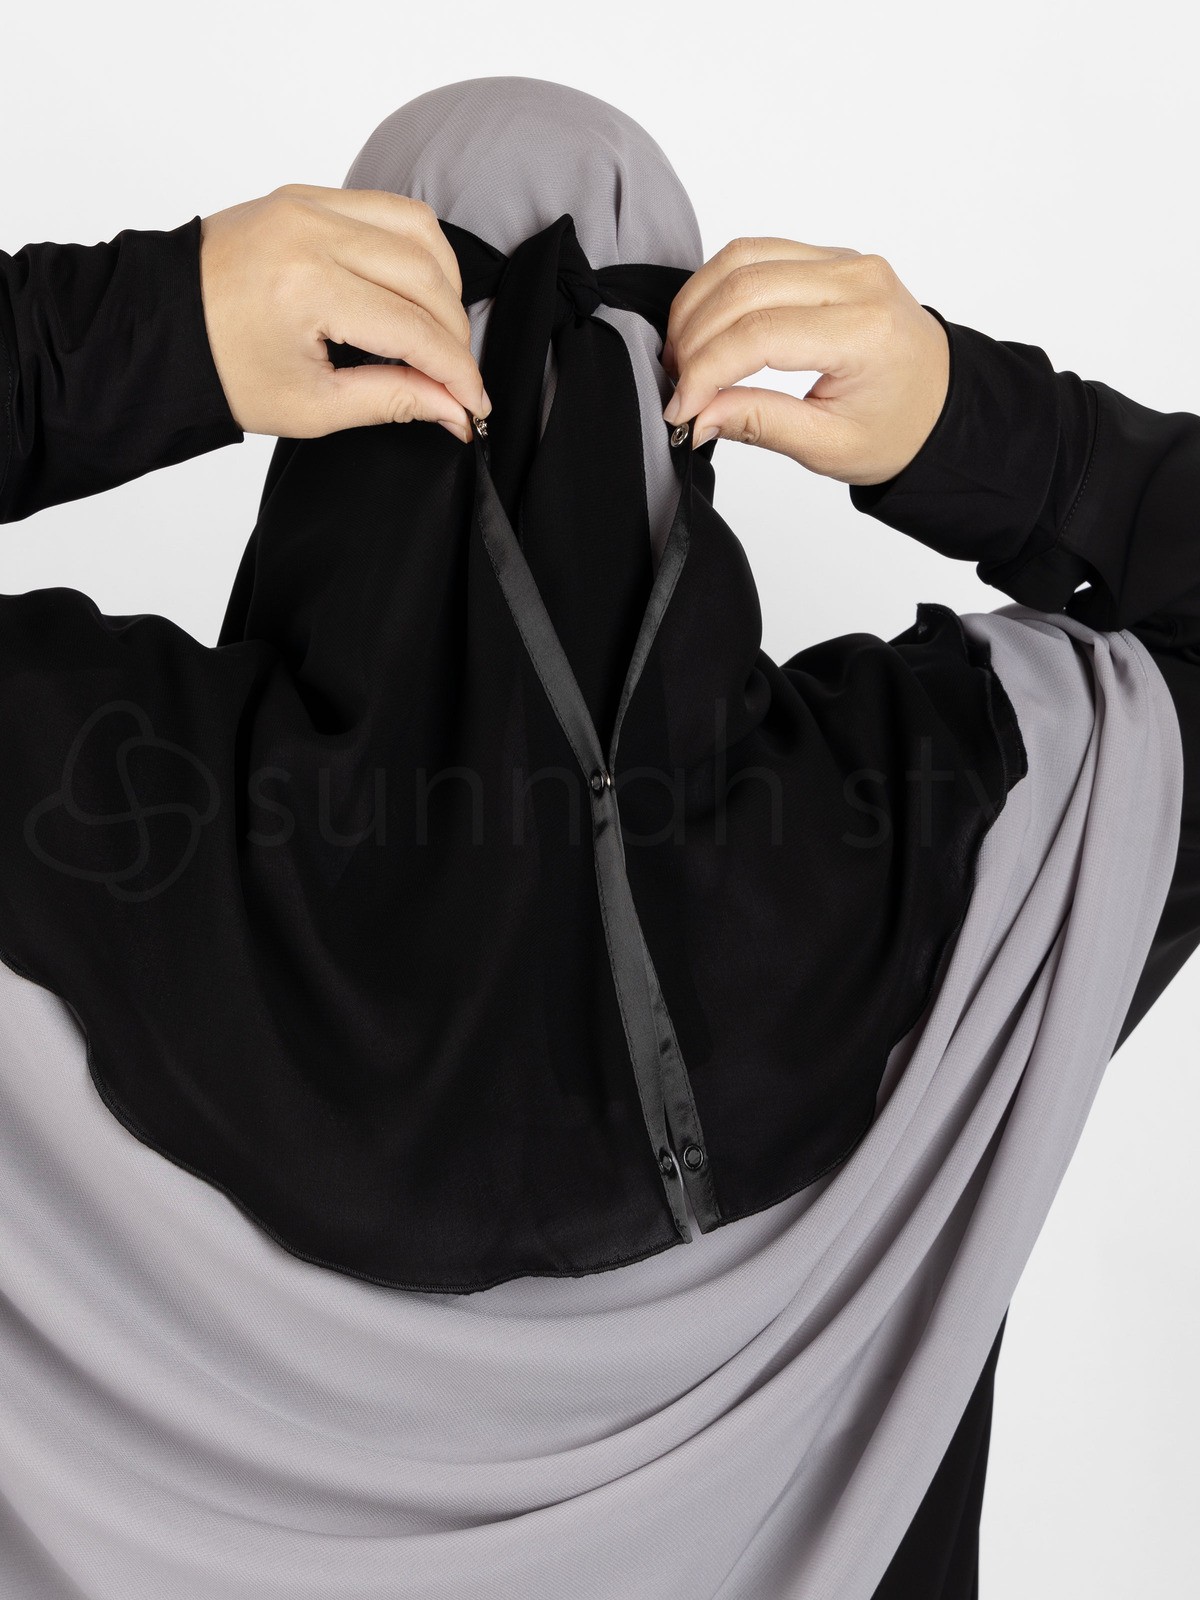 Sunnah Style - One Layer Snapp Niqab (Black)